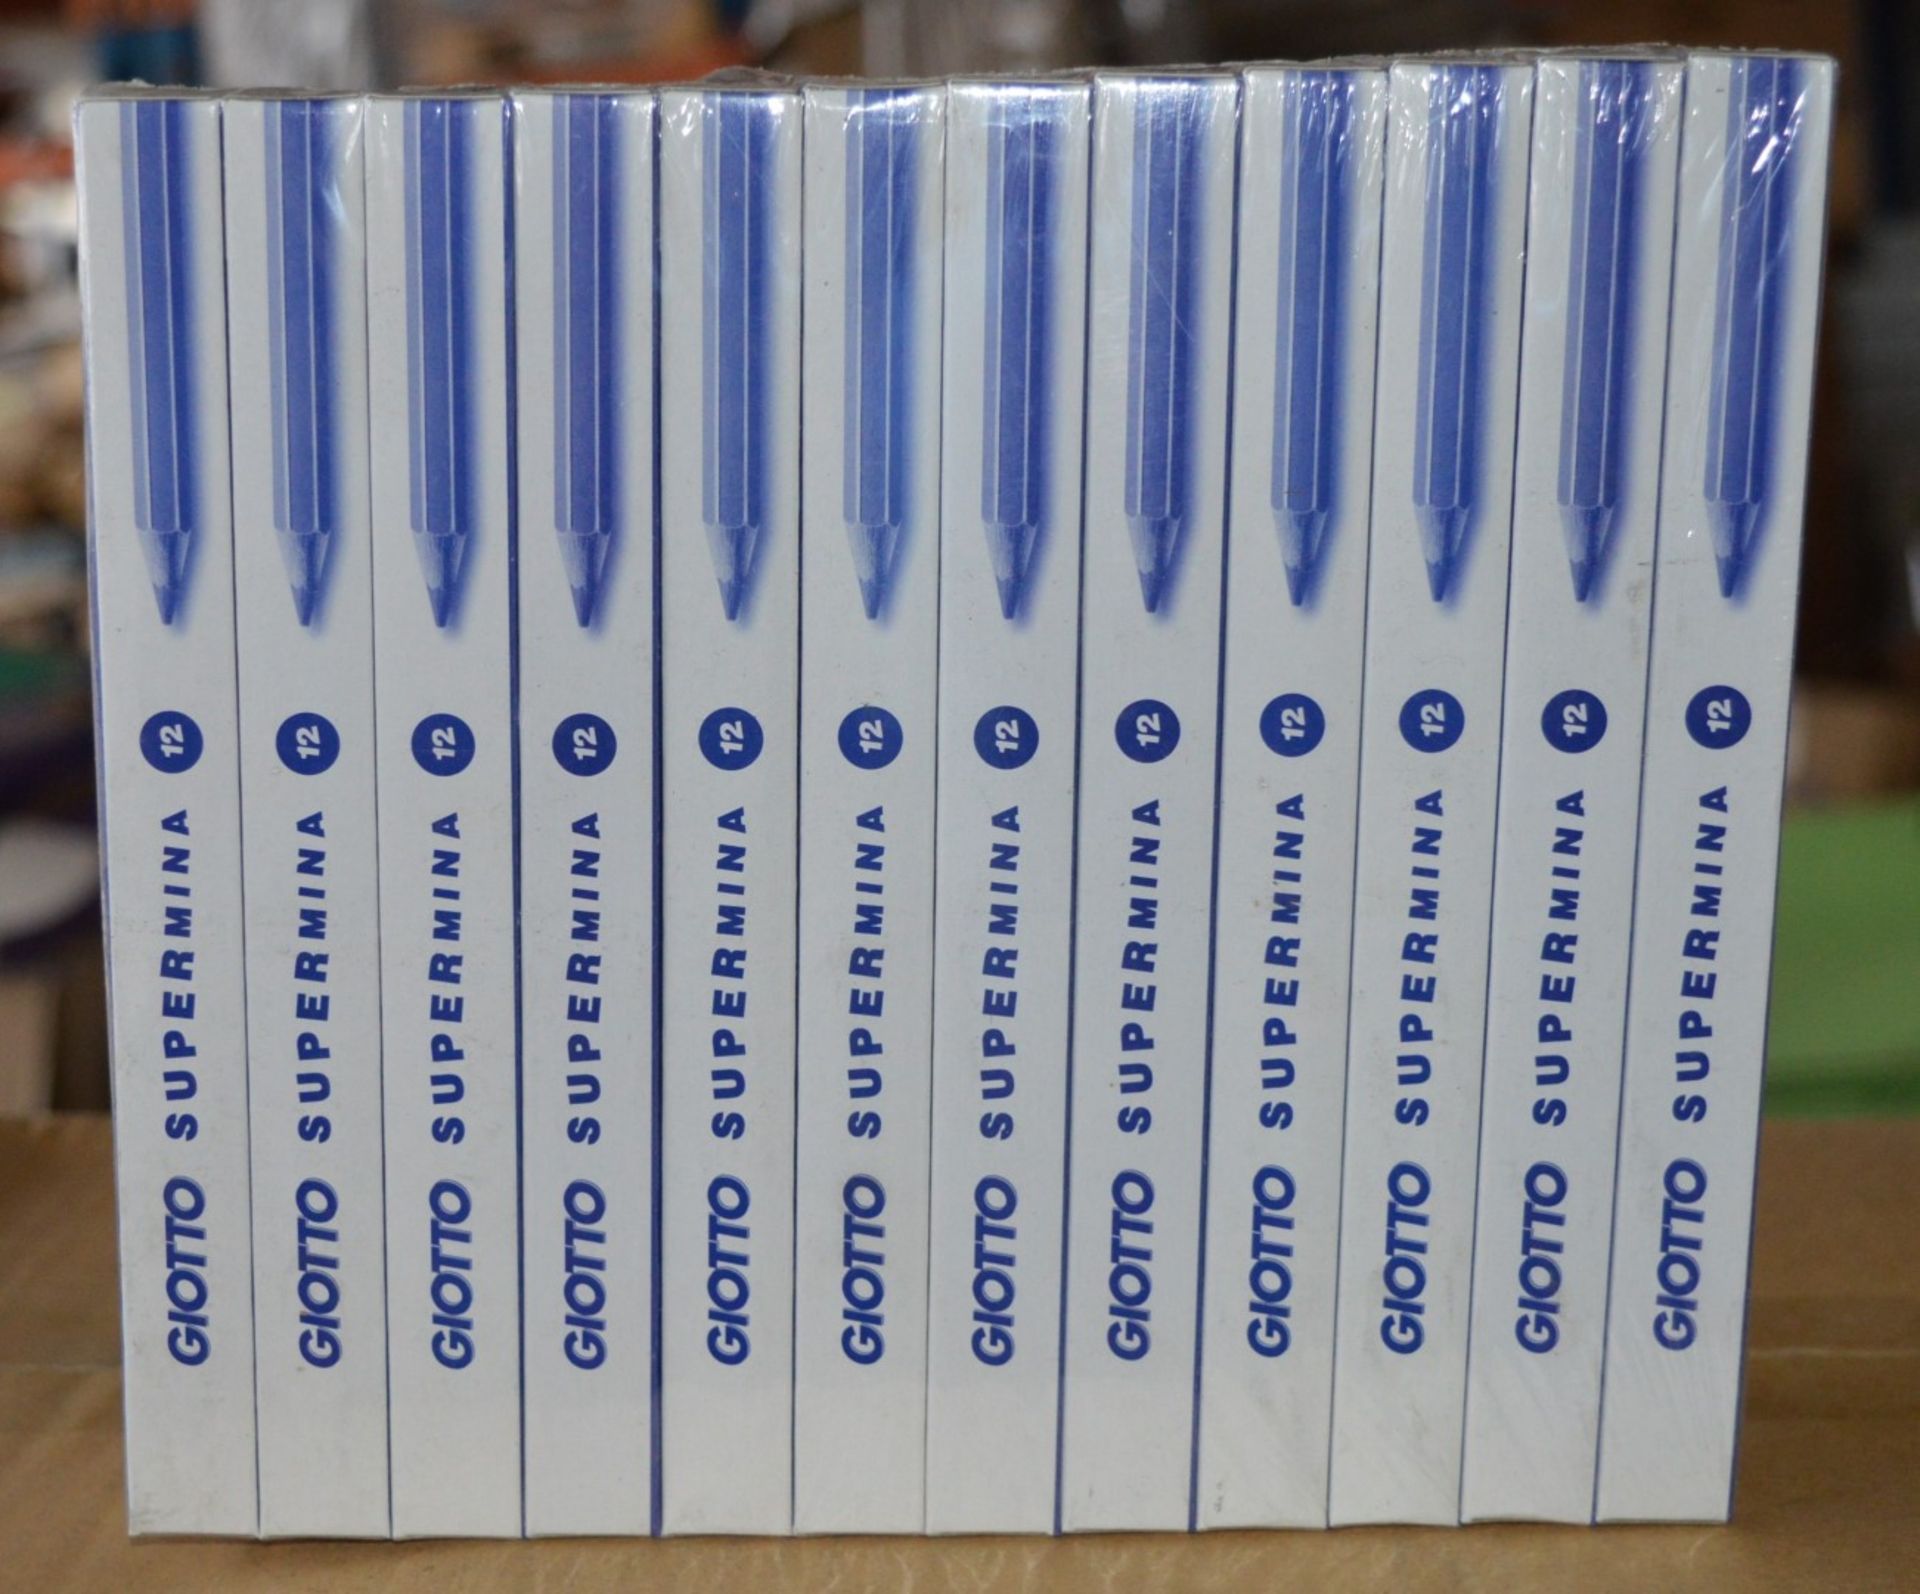 36 x Packs of Giotto Supermina 3.8mm Blue Pencils - High Quality Pencils Packed in Boxes of 12 - - Image 5 of 10